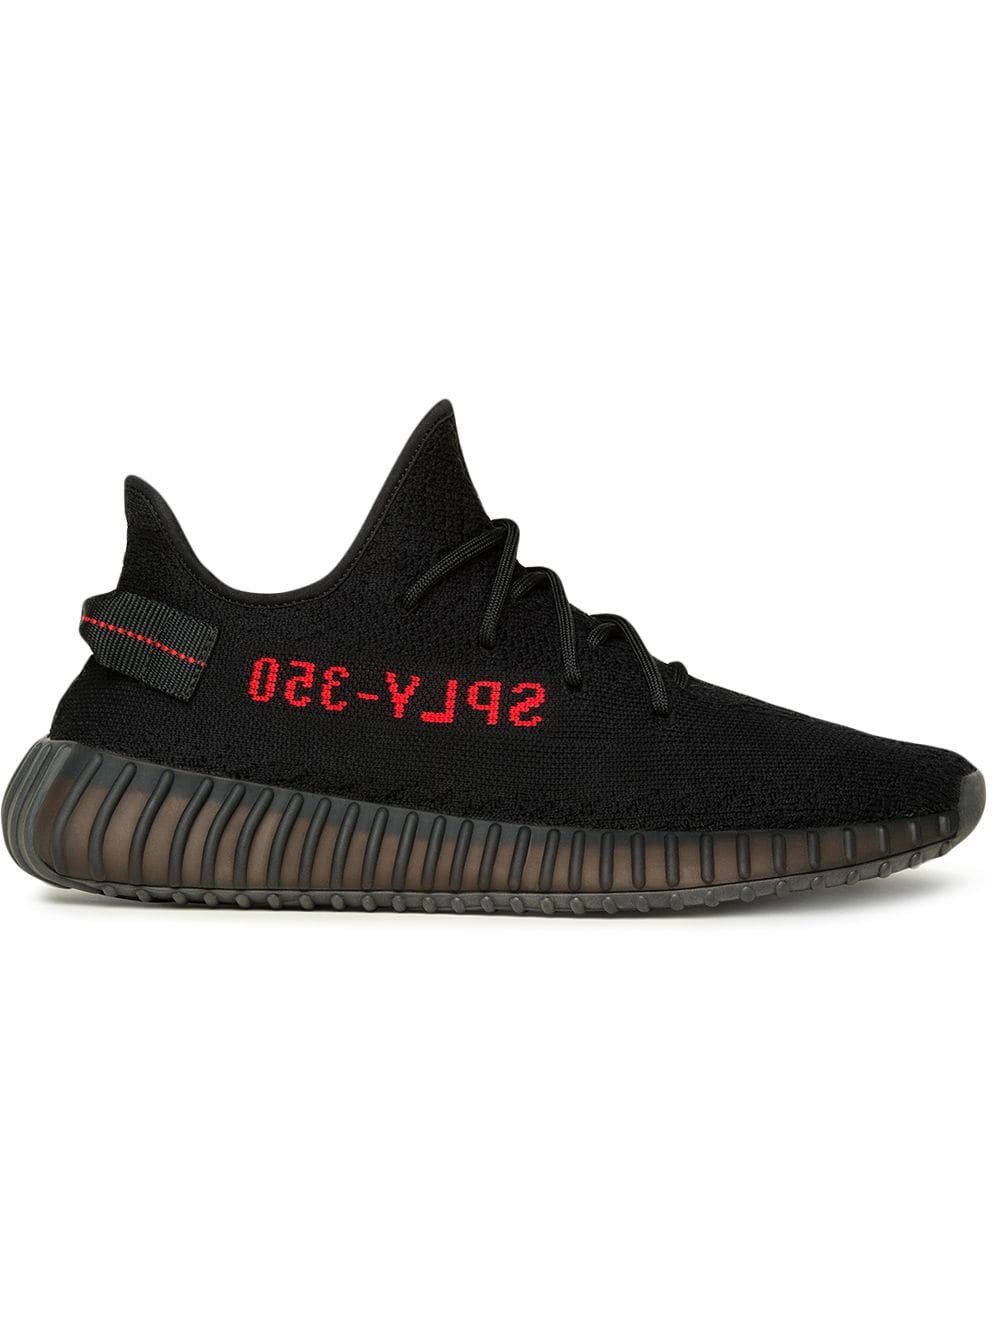 adidas YEEZY - Yeezy Boost 350 V2 "Black/Red" sneakers